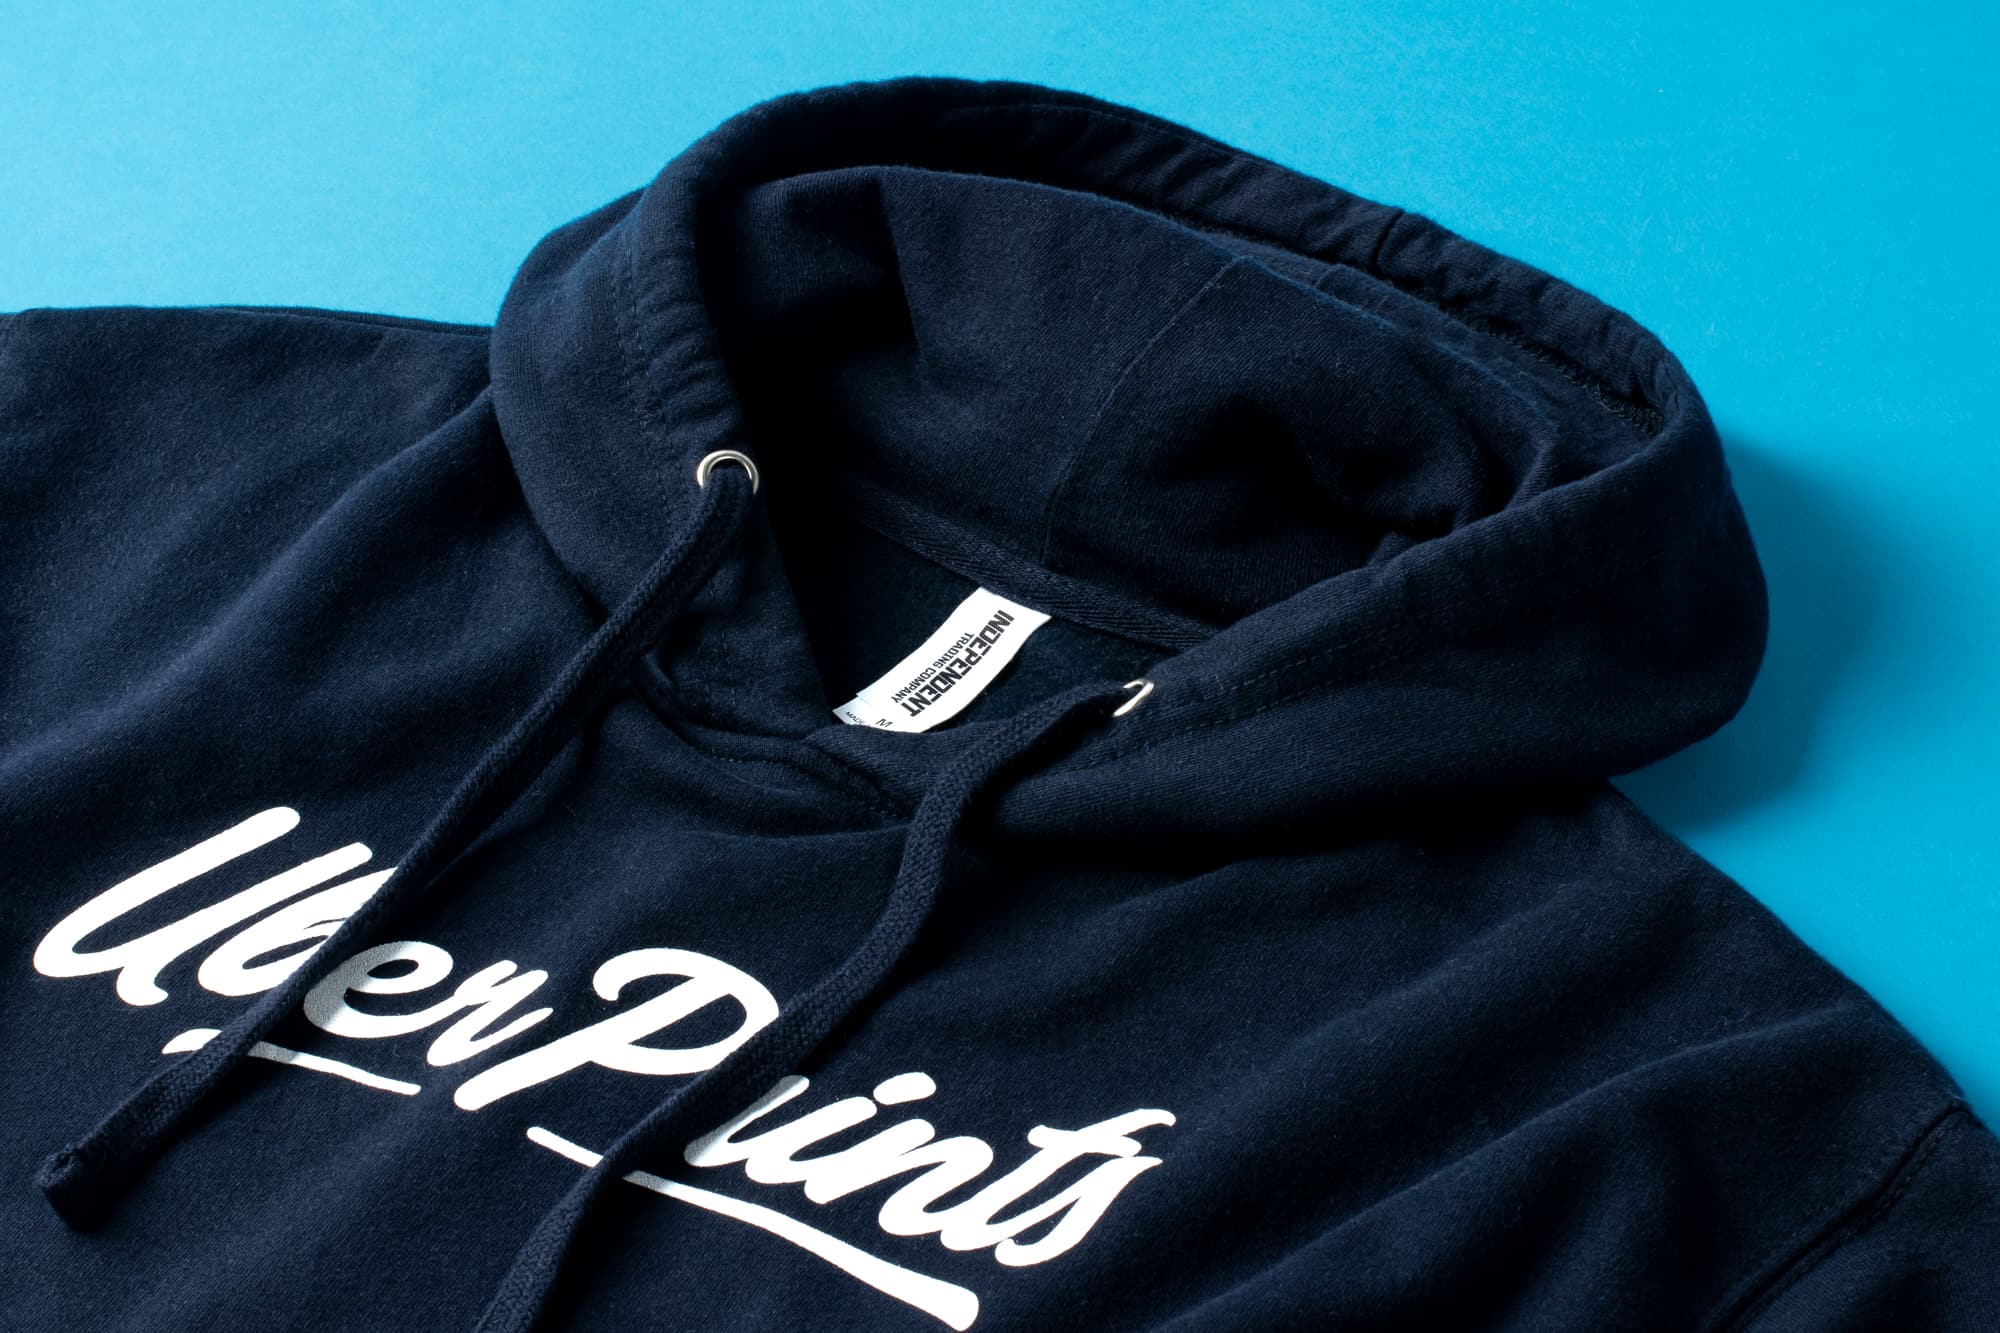 Detail view of the Premium Hoodie's collar and tag to show material